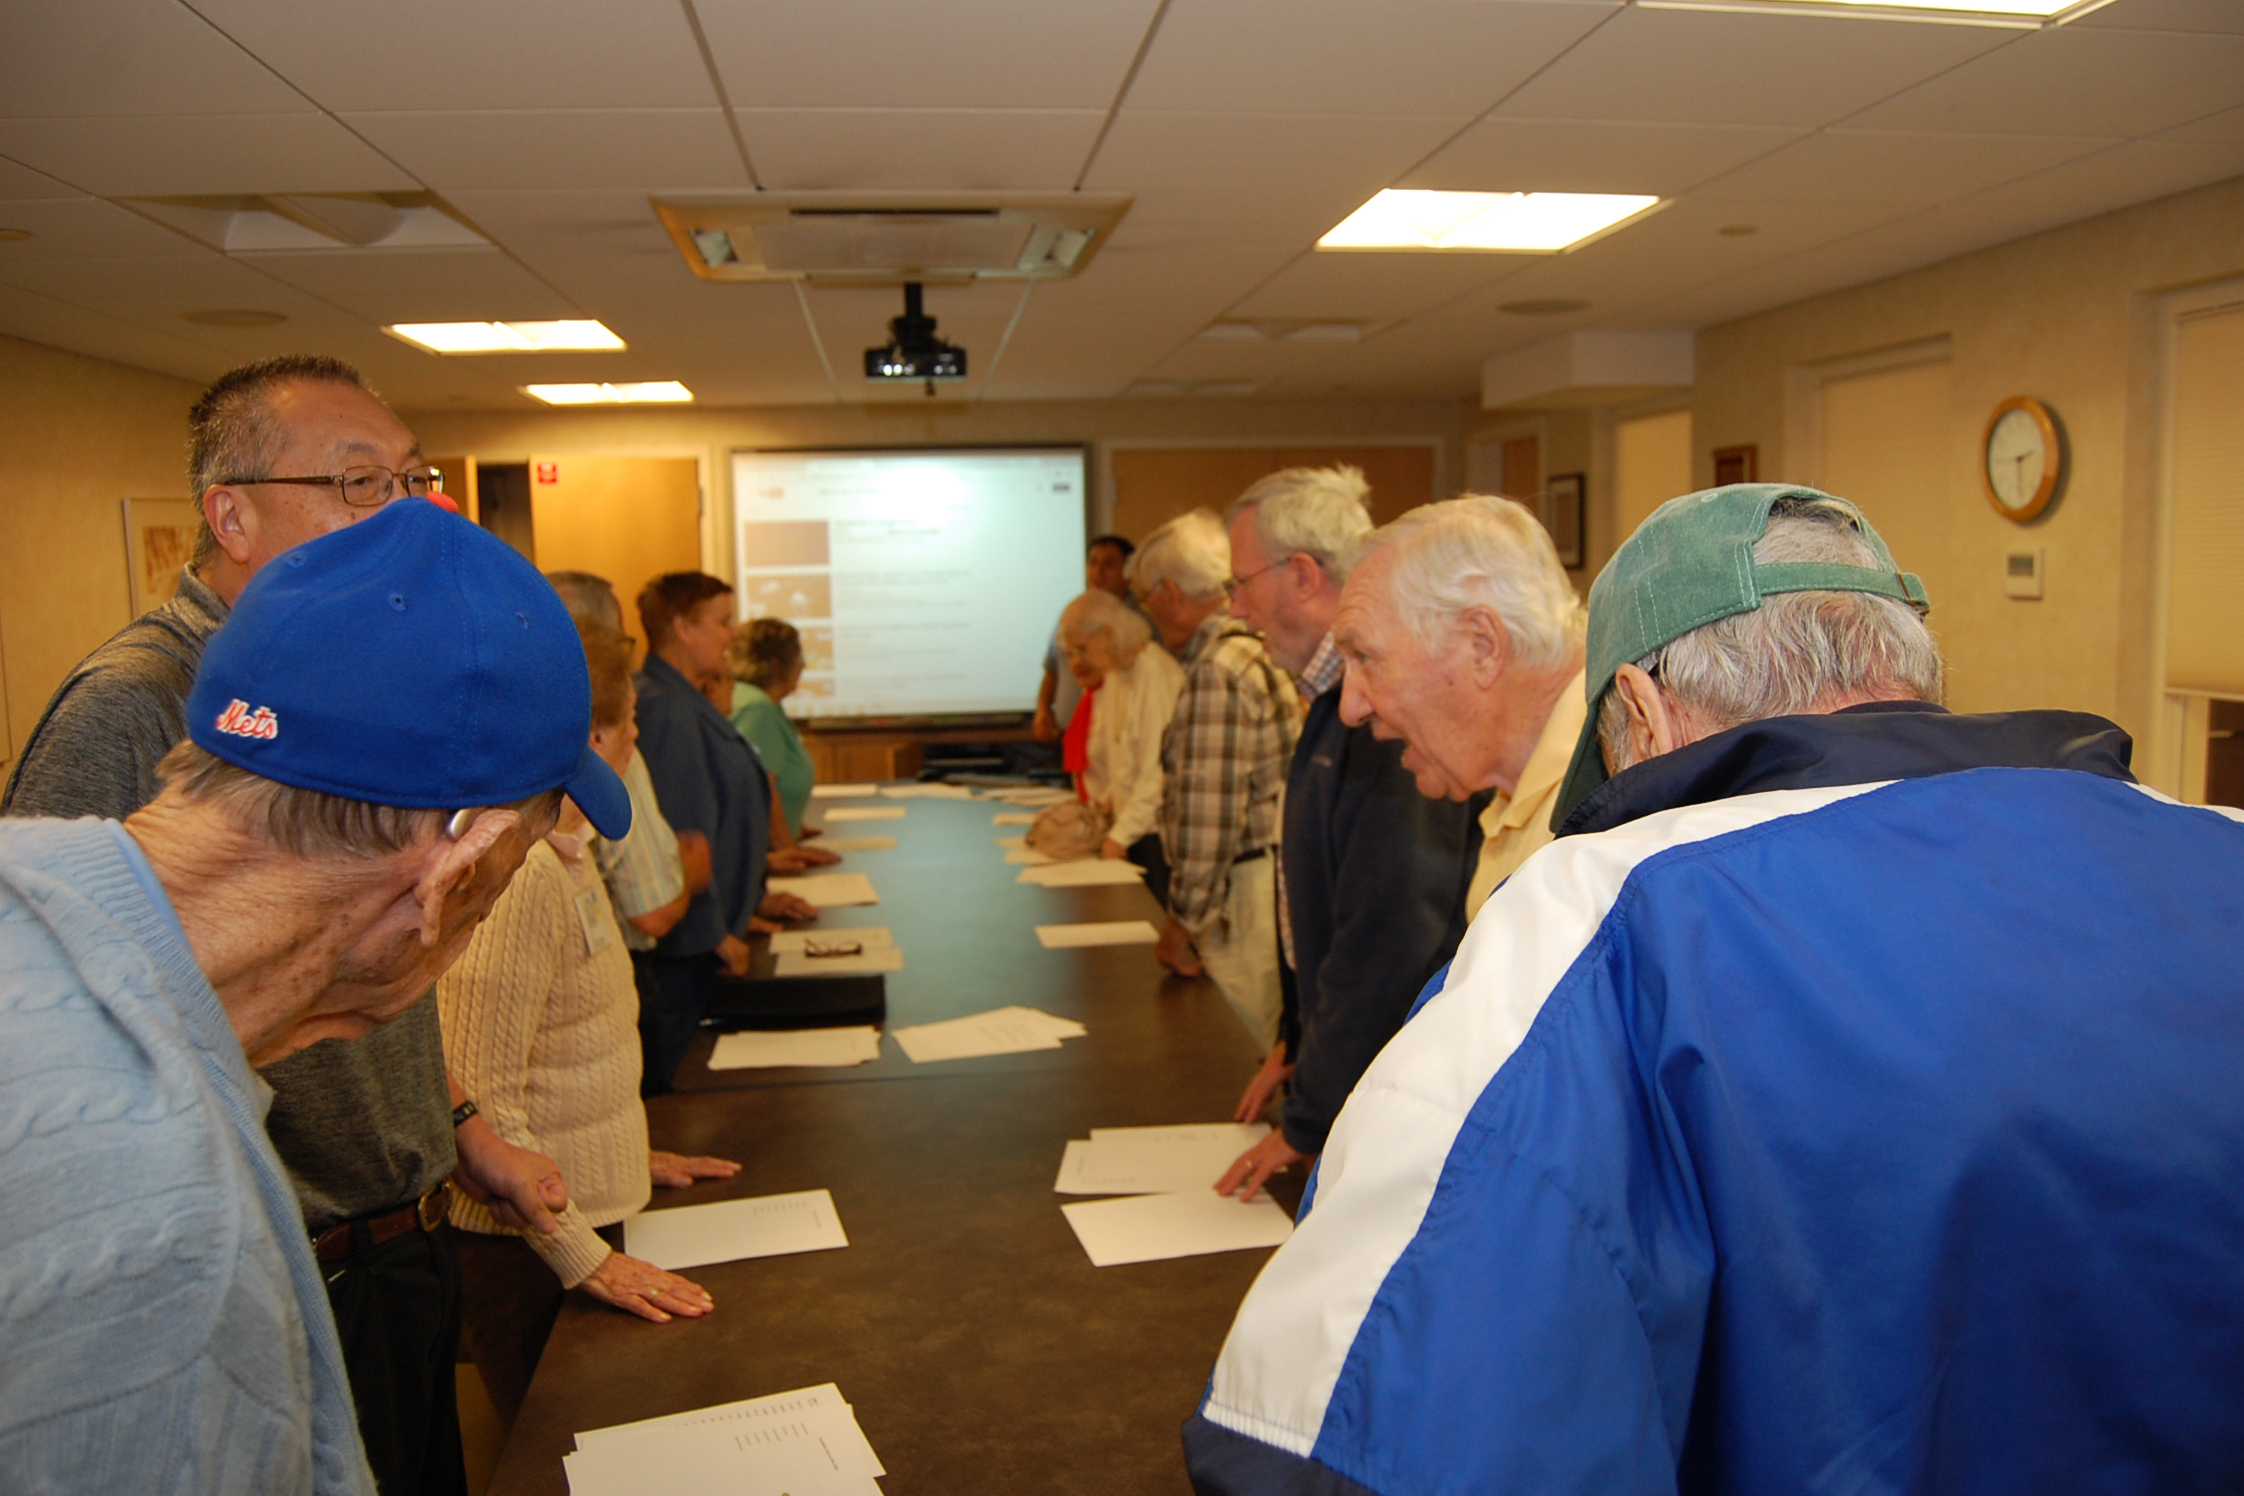 The “Seventh Inning Stretch” at the River House Adult Care Center in Cos Cobb, Connecticut, is when participants in the Baseball Reminiscence Program sing “Take Me Out to the Ballgame” during the midway point during their session. (Kenneth Best/UConn Photo)